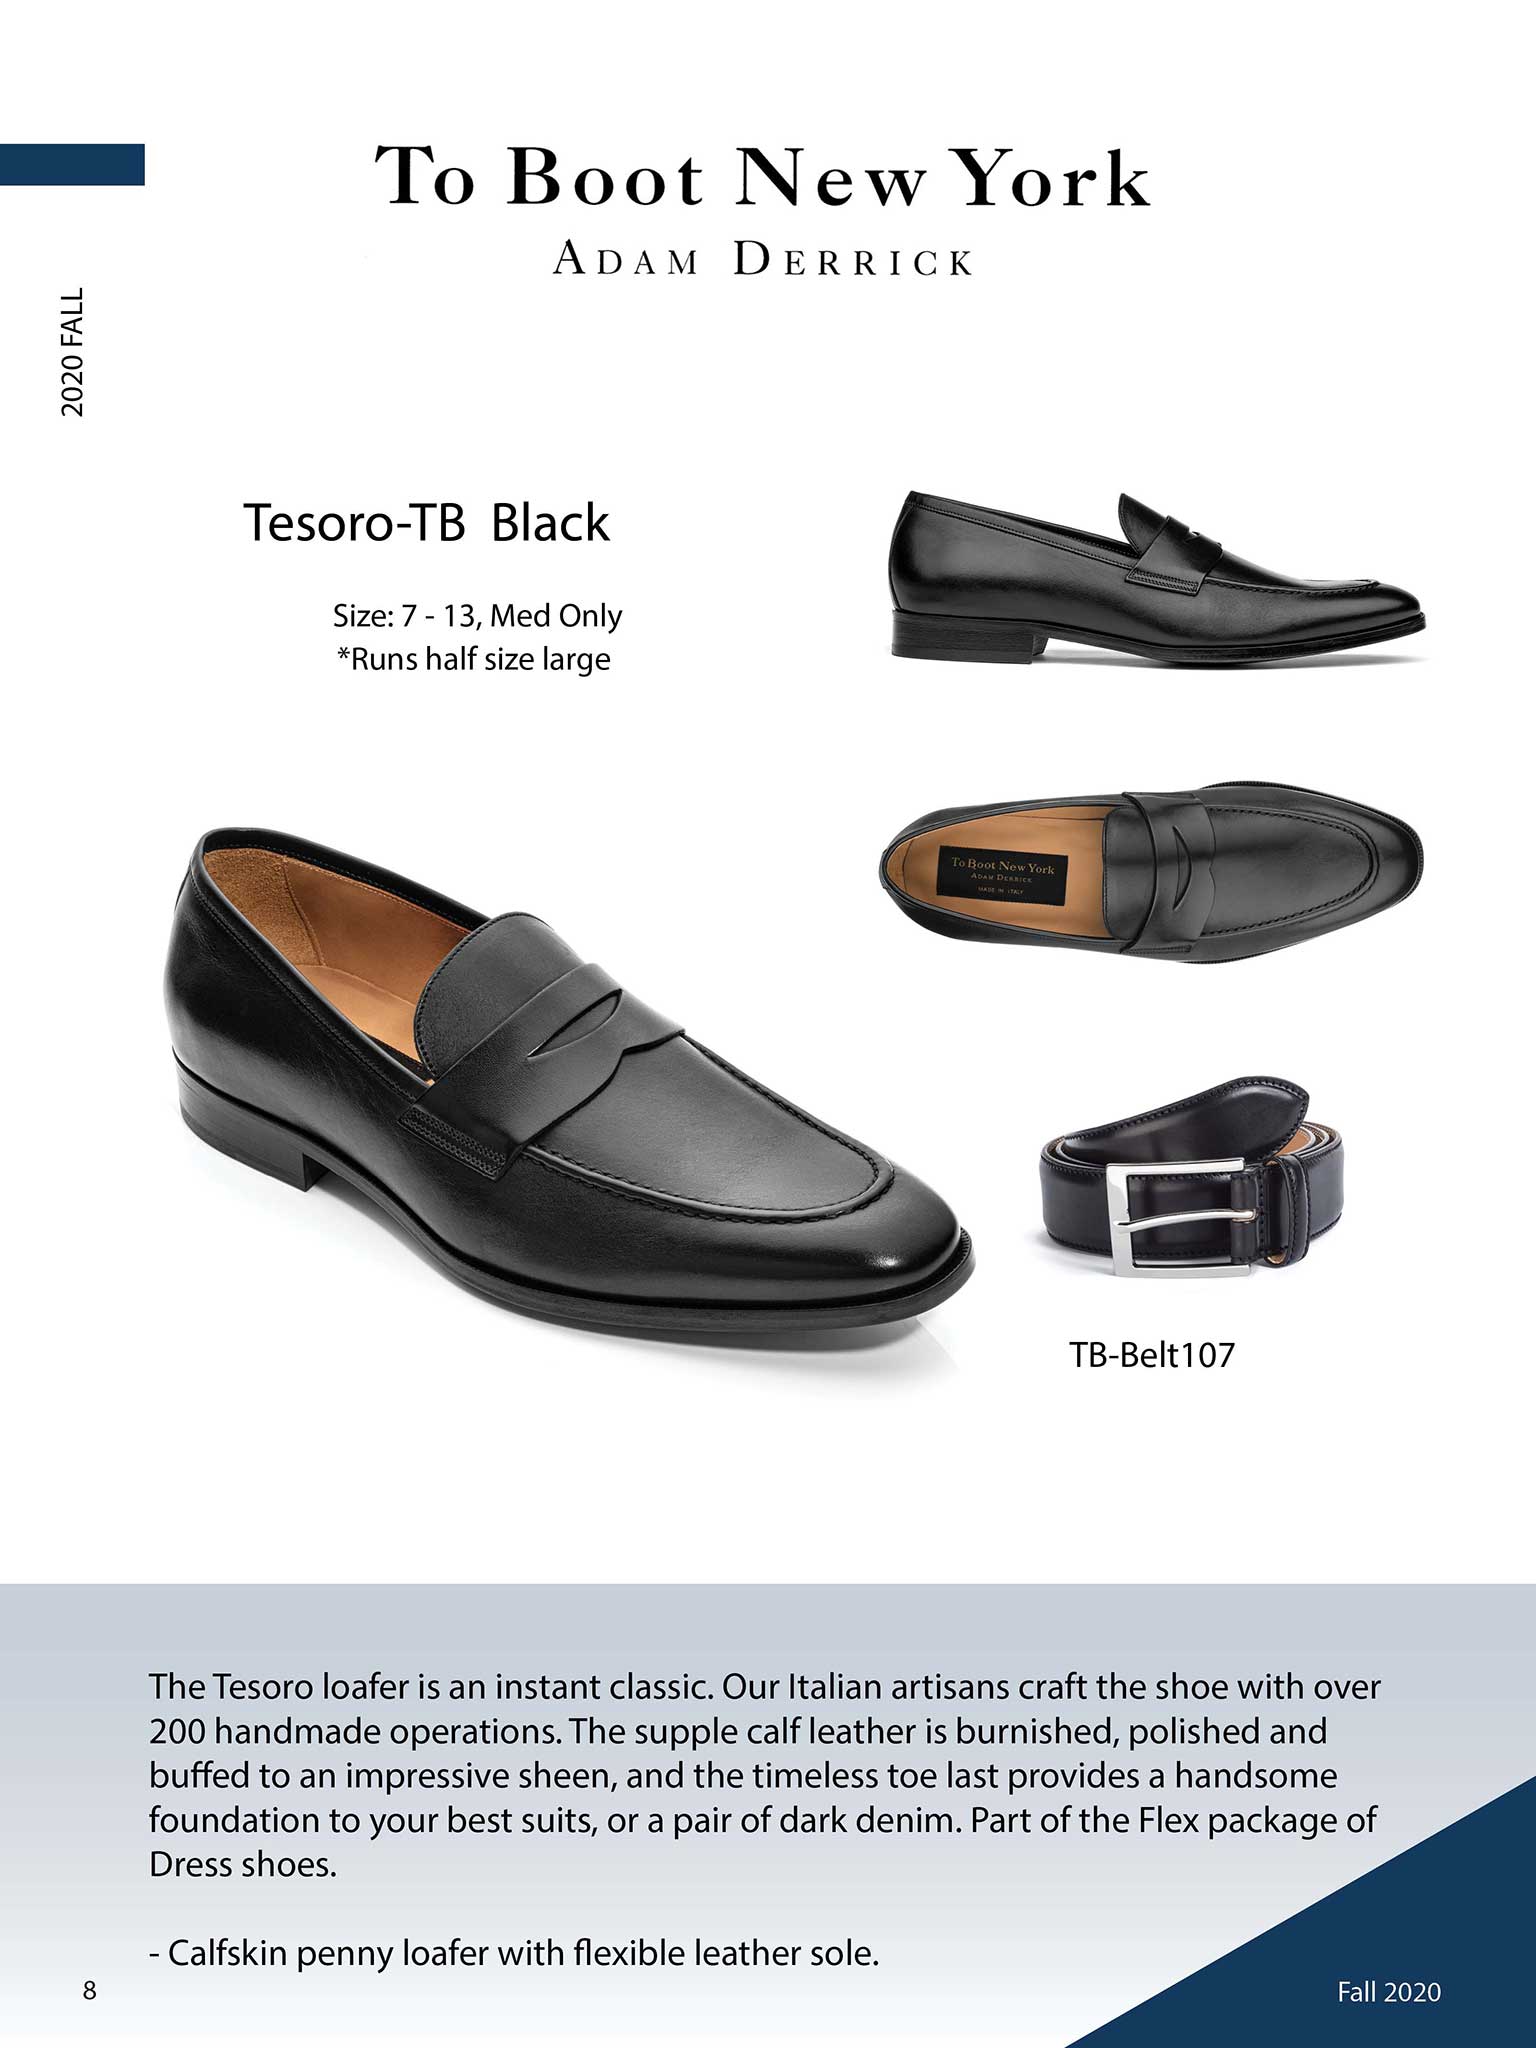 To Boot New York                                                                                                                                                                                                                                          , Tesoro in Black by To Boot New York